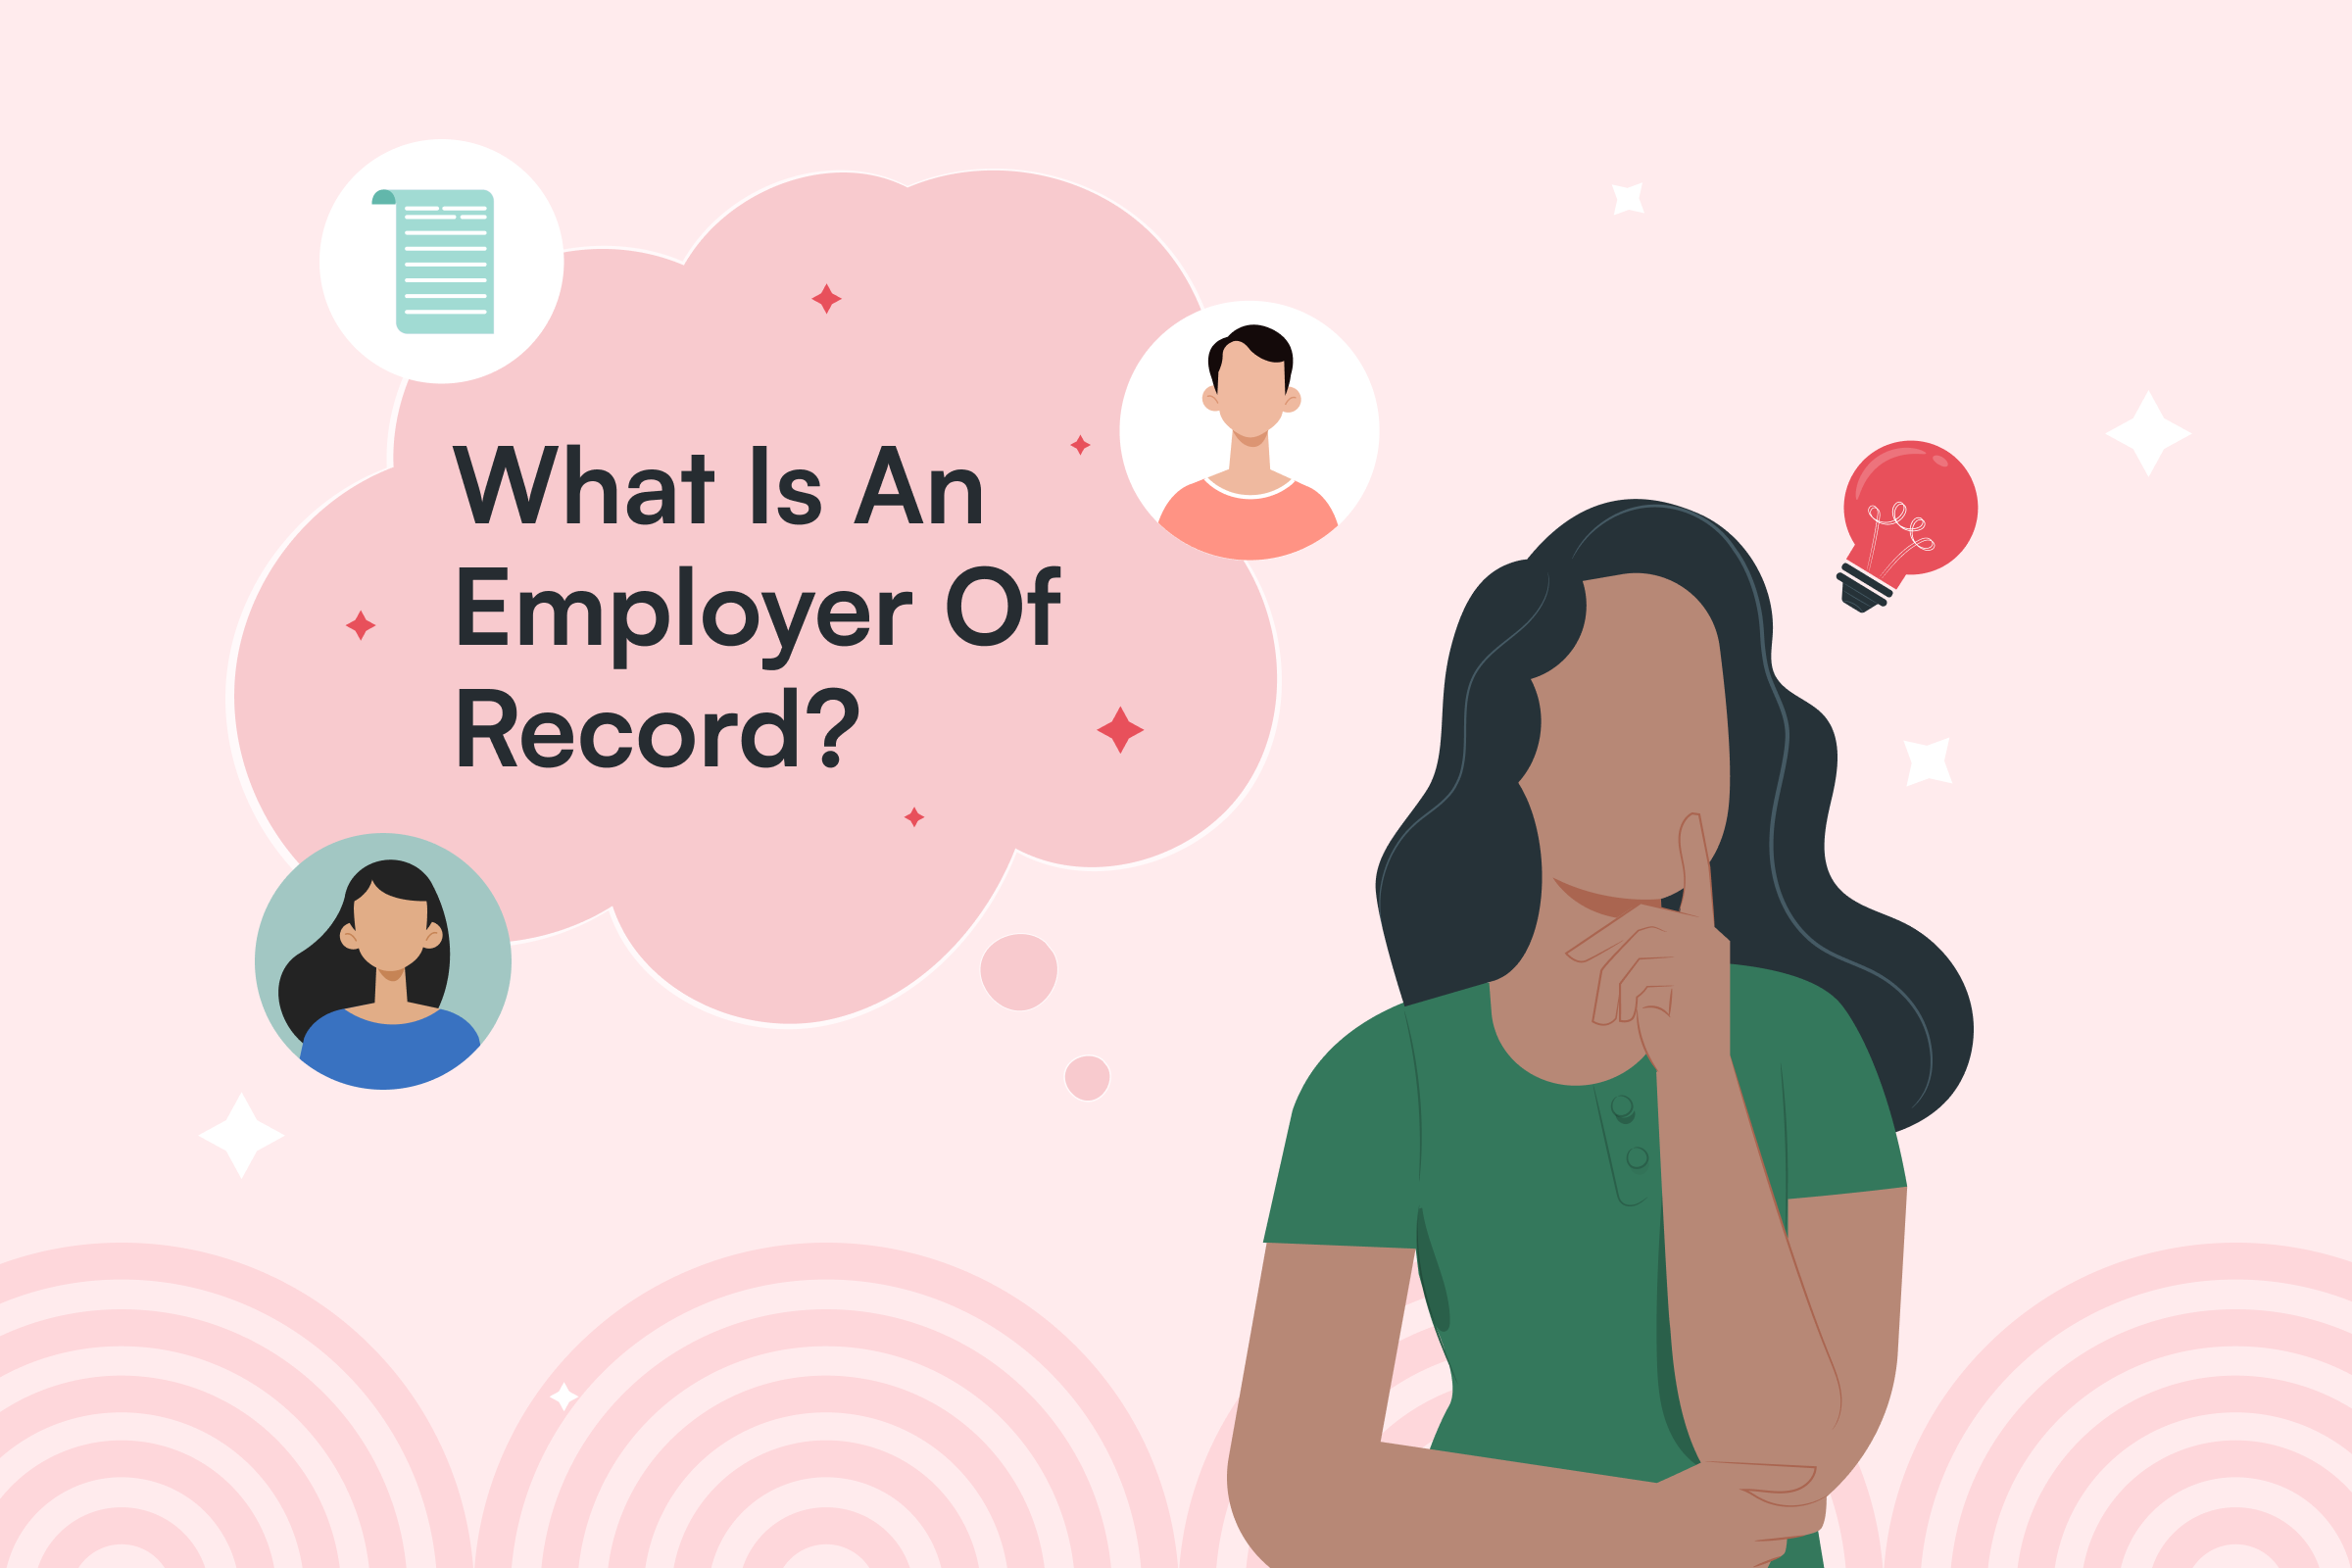 What is an employer of record?